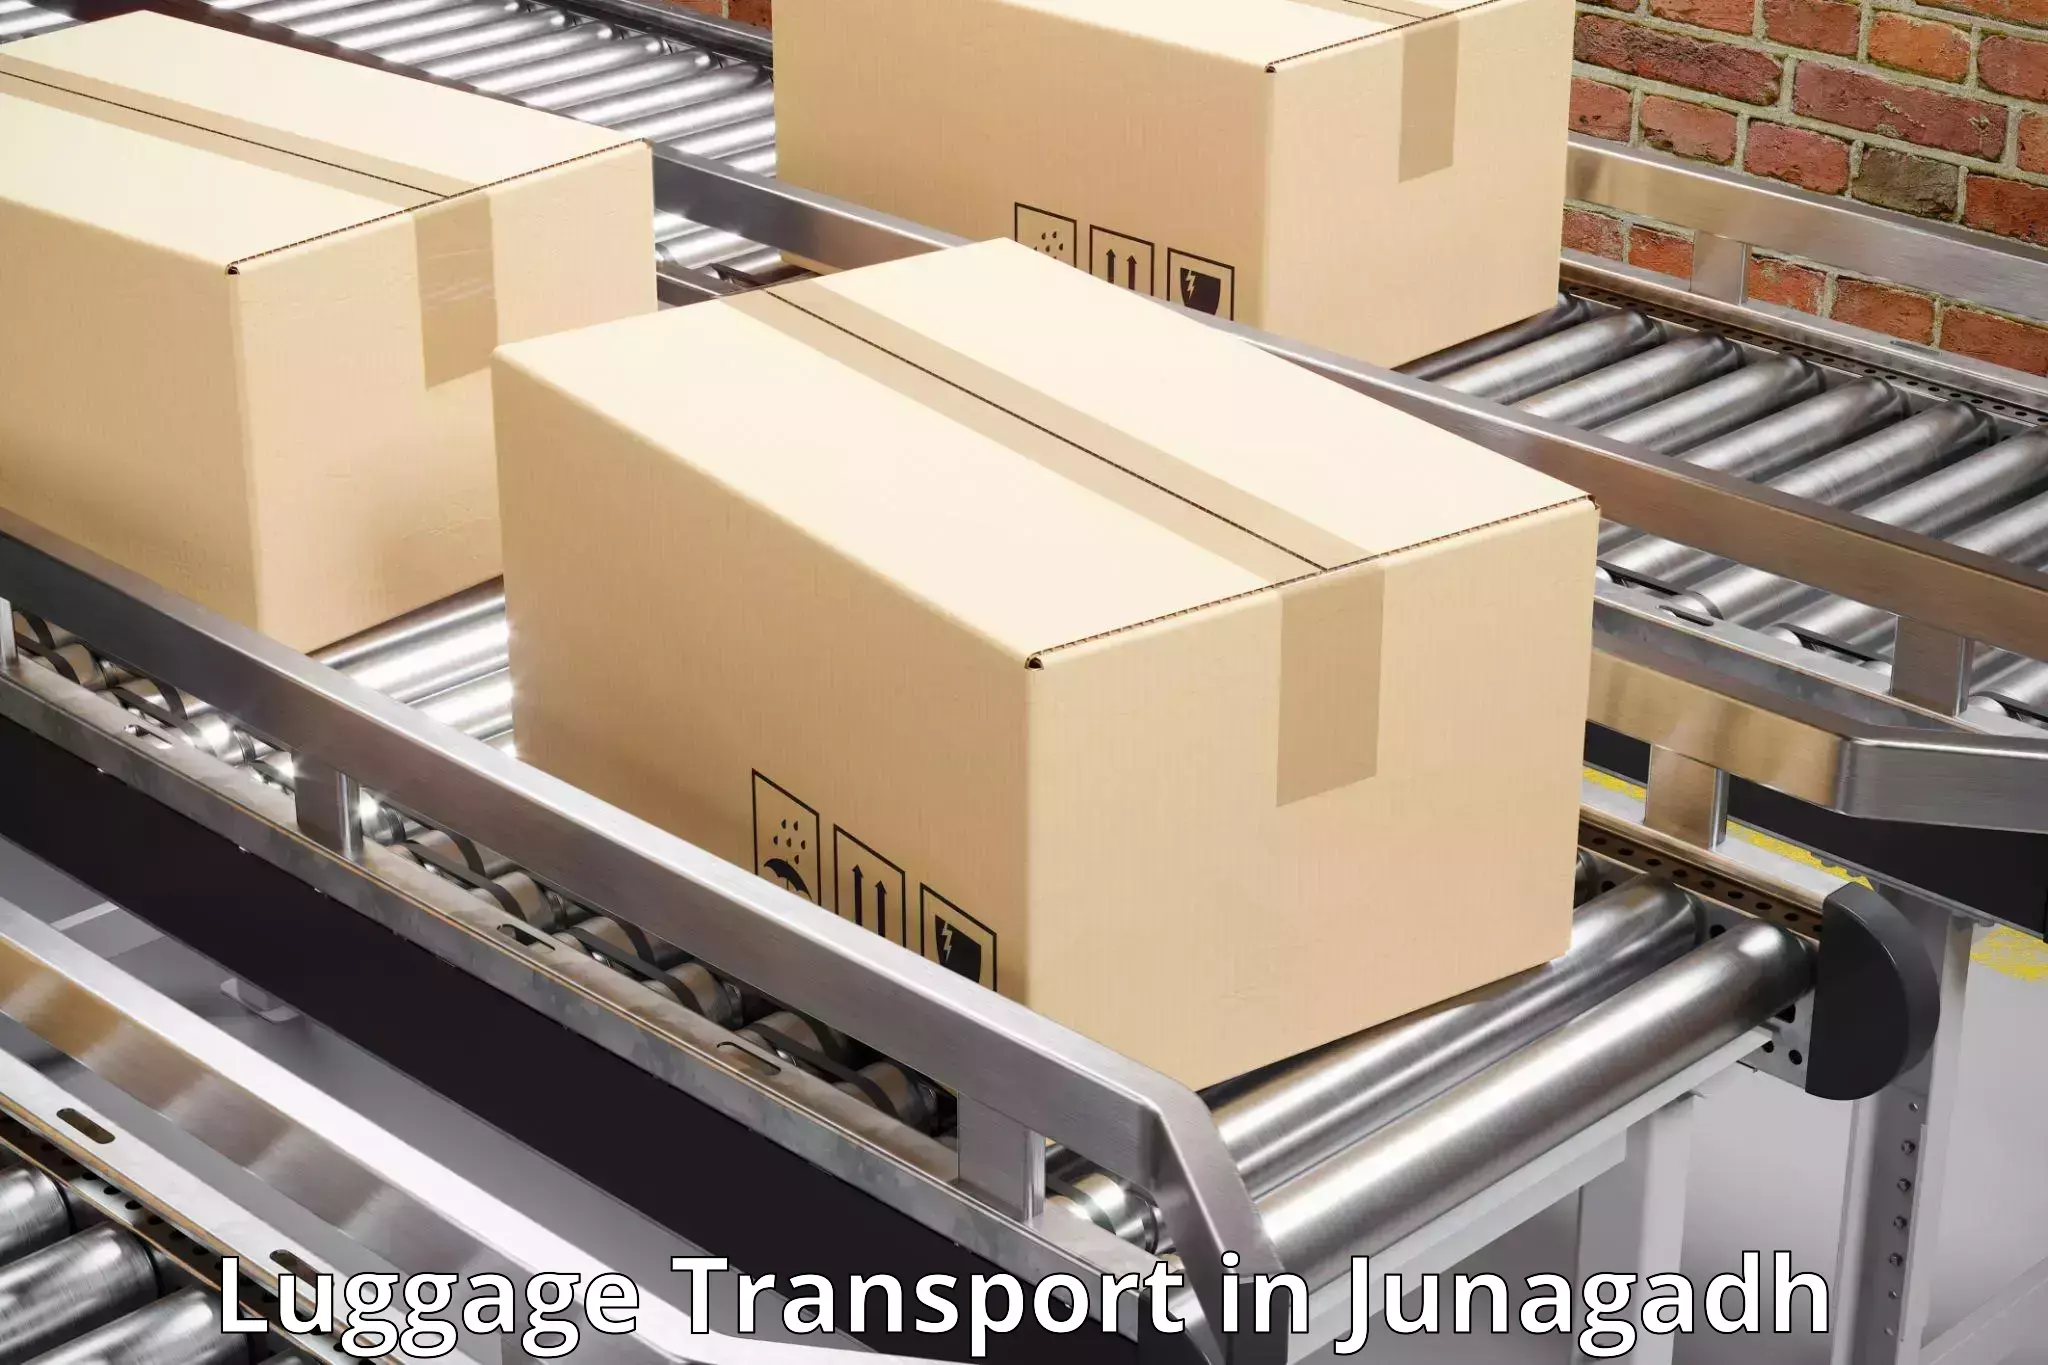 Luggage delivery operations in Junagadh